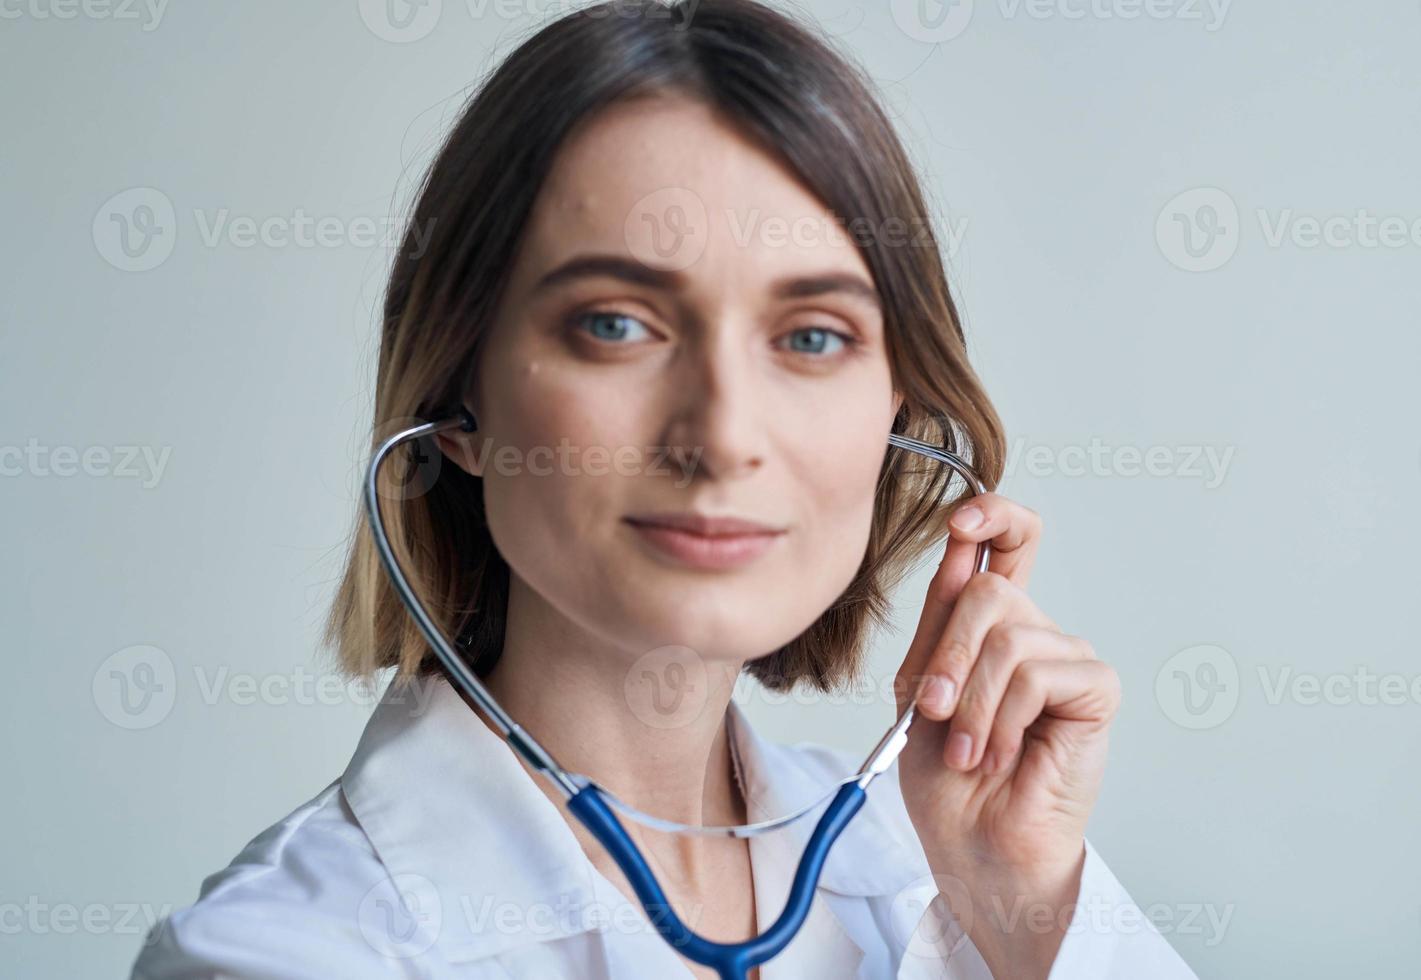 Blue stethoscope woman doctor professional worker portrait cropped view photo